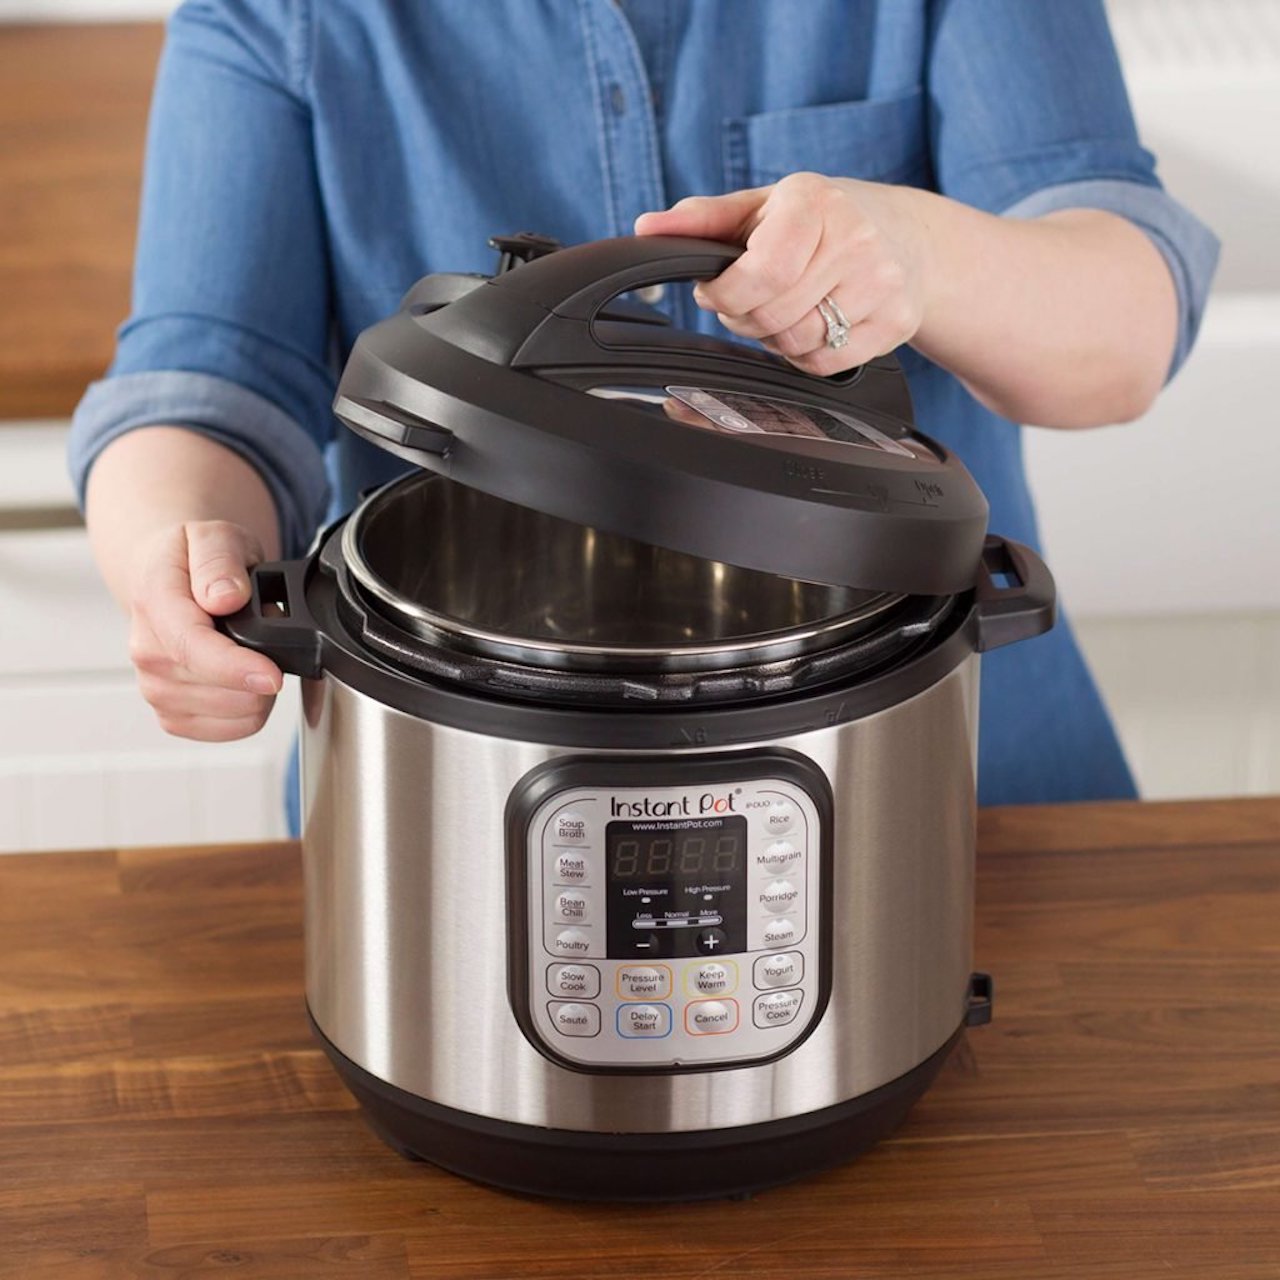 How To Store Instant Pot